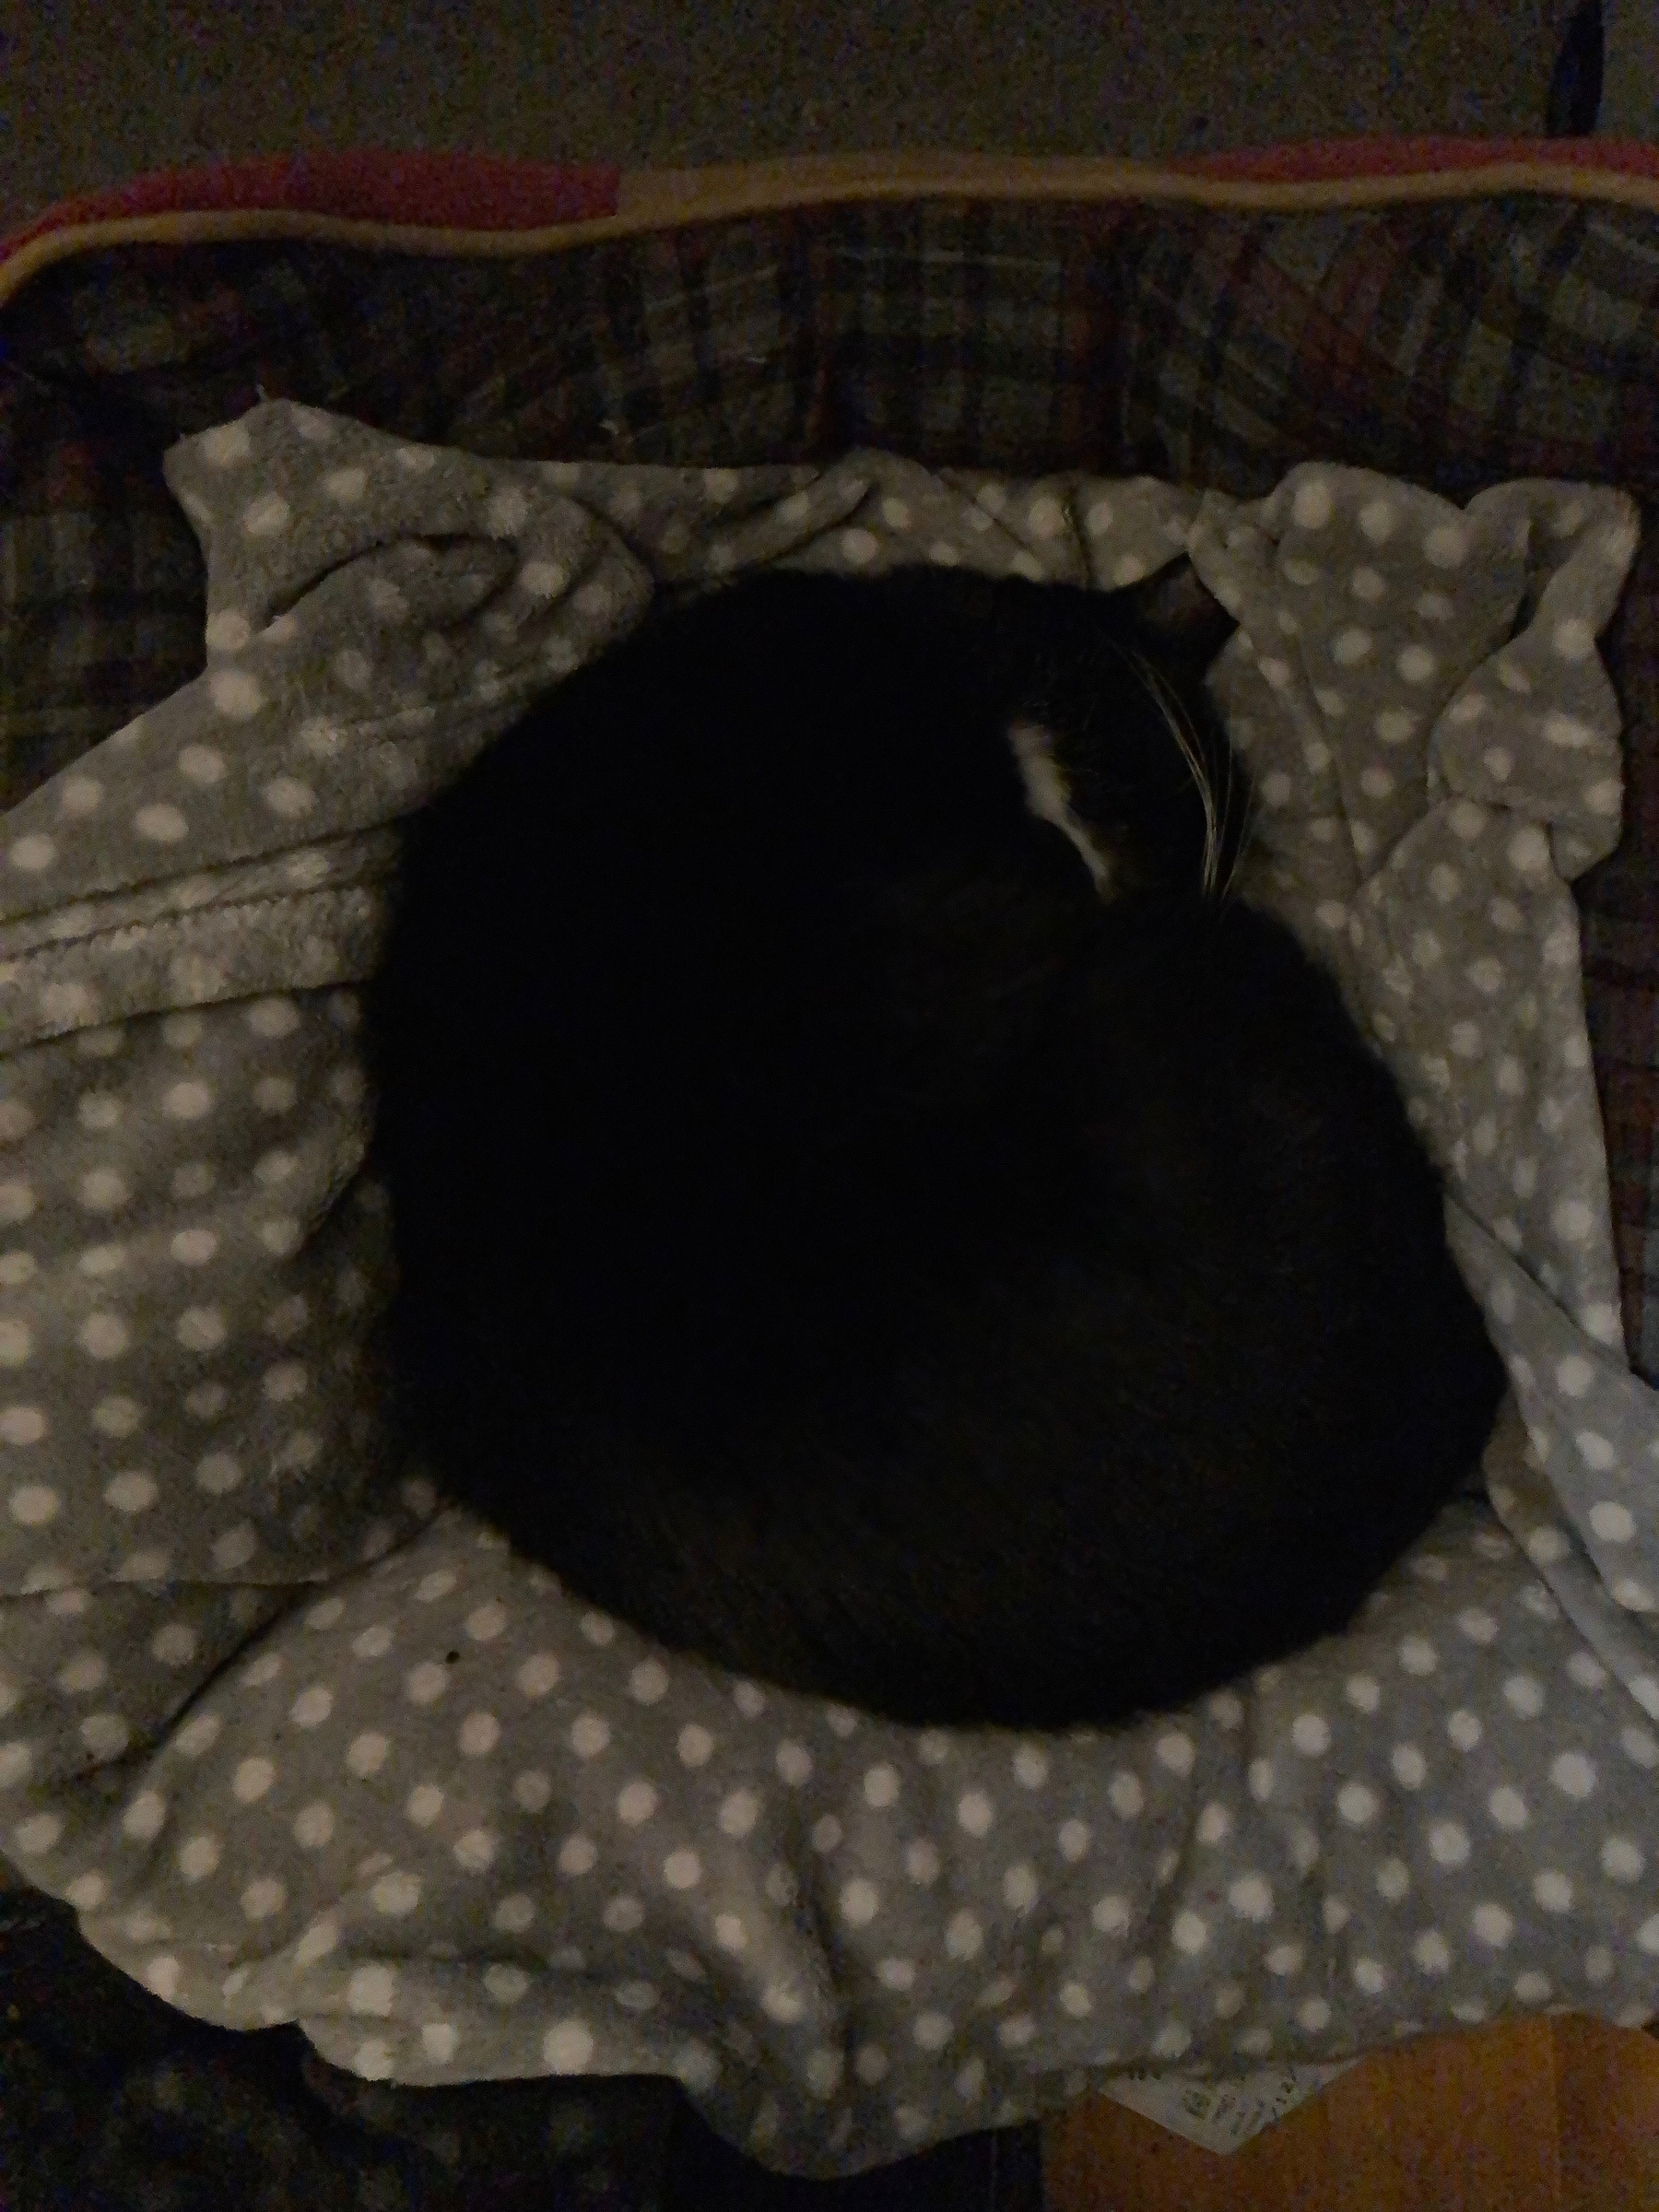 Top-down view of a black and white cat, curled up in her bed, asleep.